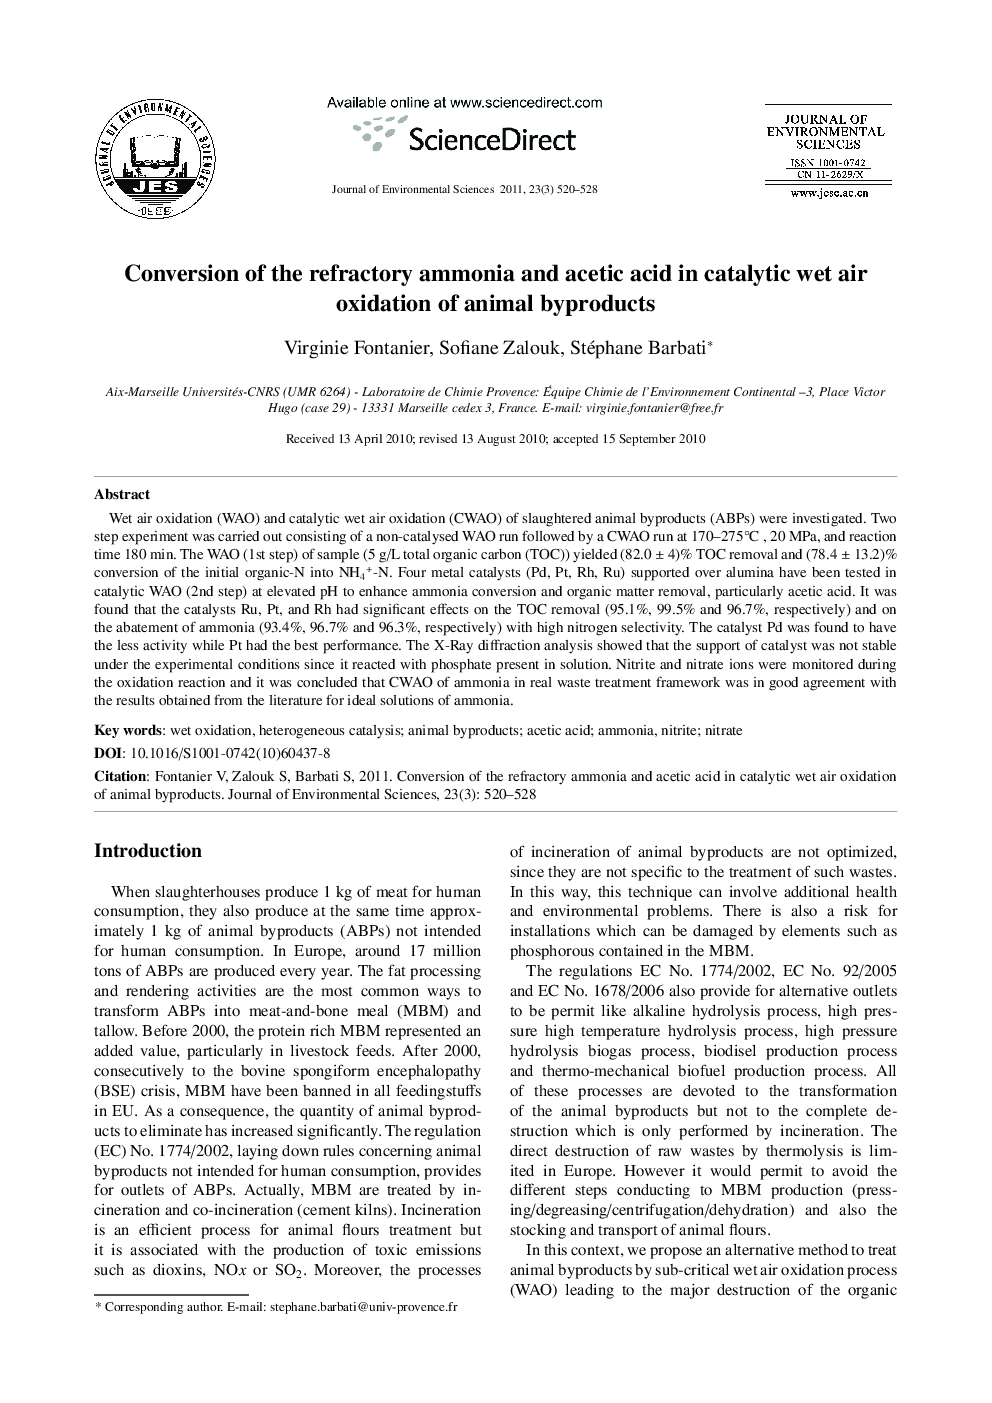 Conversion of the refractory ammonia and acetic acid in catalytic wet air oxidation of animal byproducts